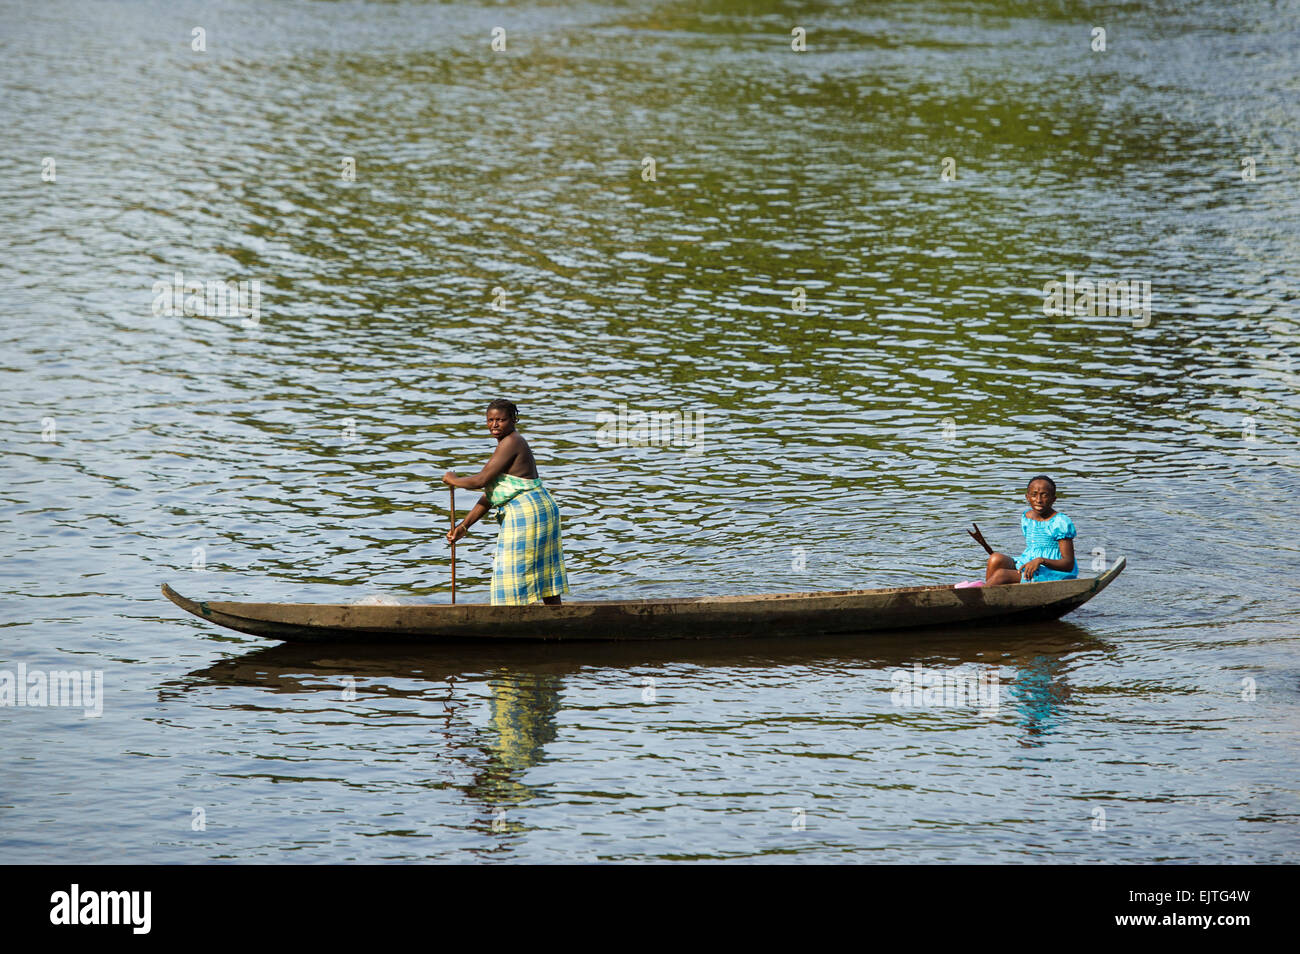 Maroon women fishing on the Upper Suriname River, Suriname Stock Photo